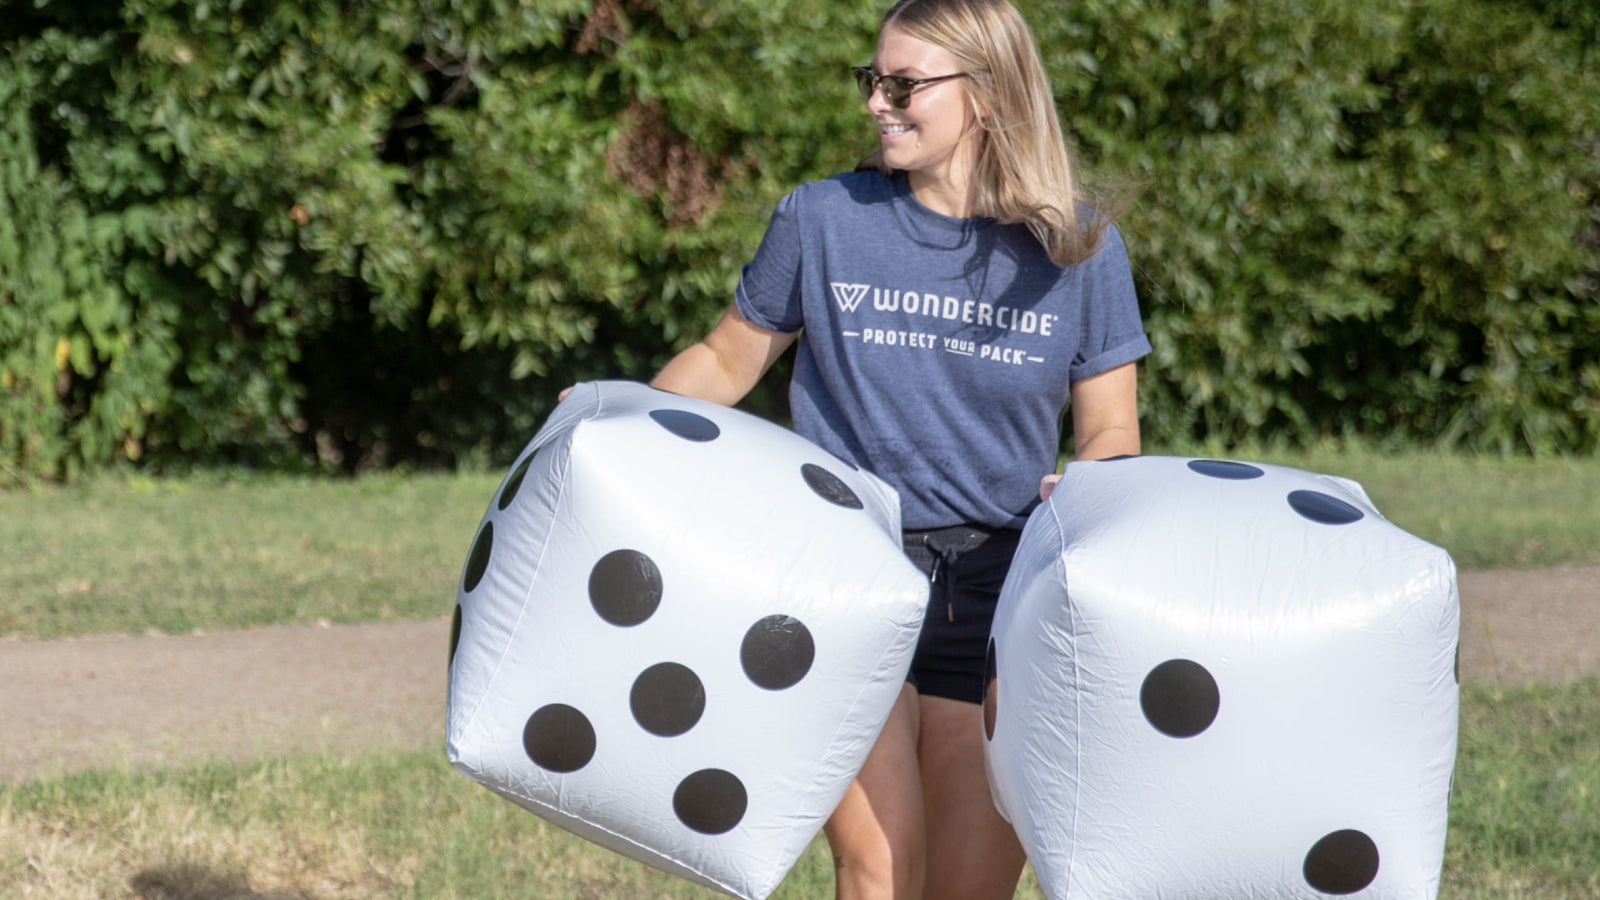 A woman in a Wondercide shirt plays with giant inflatable dice